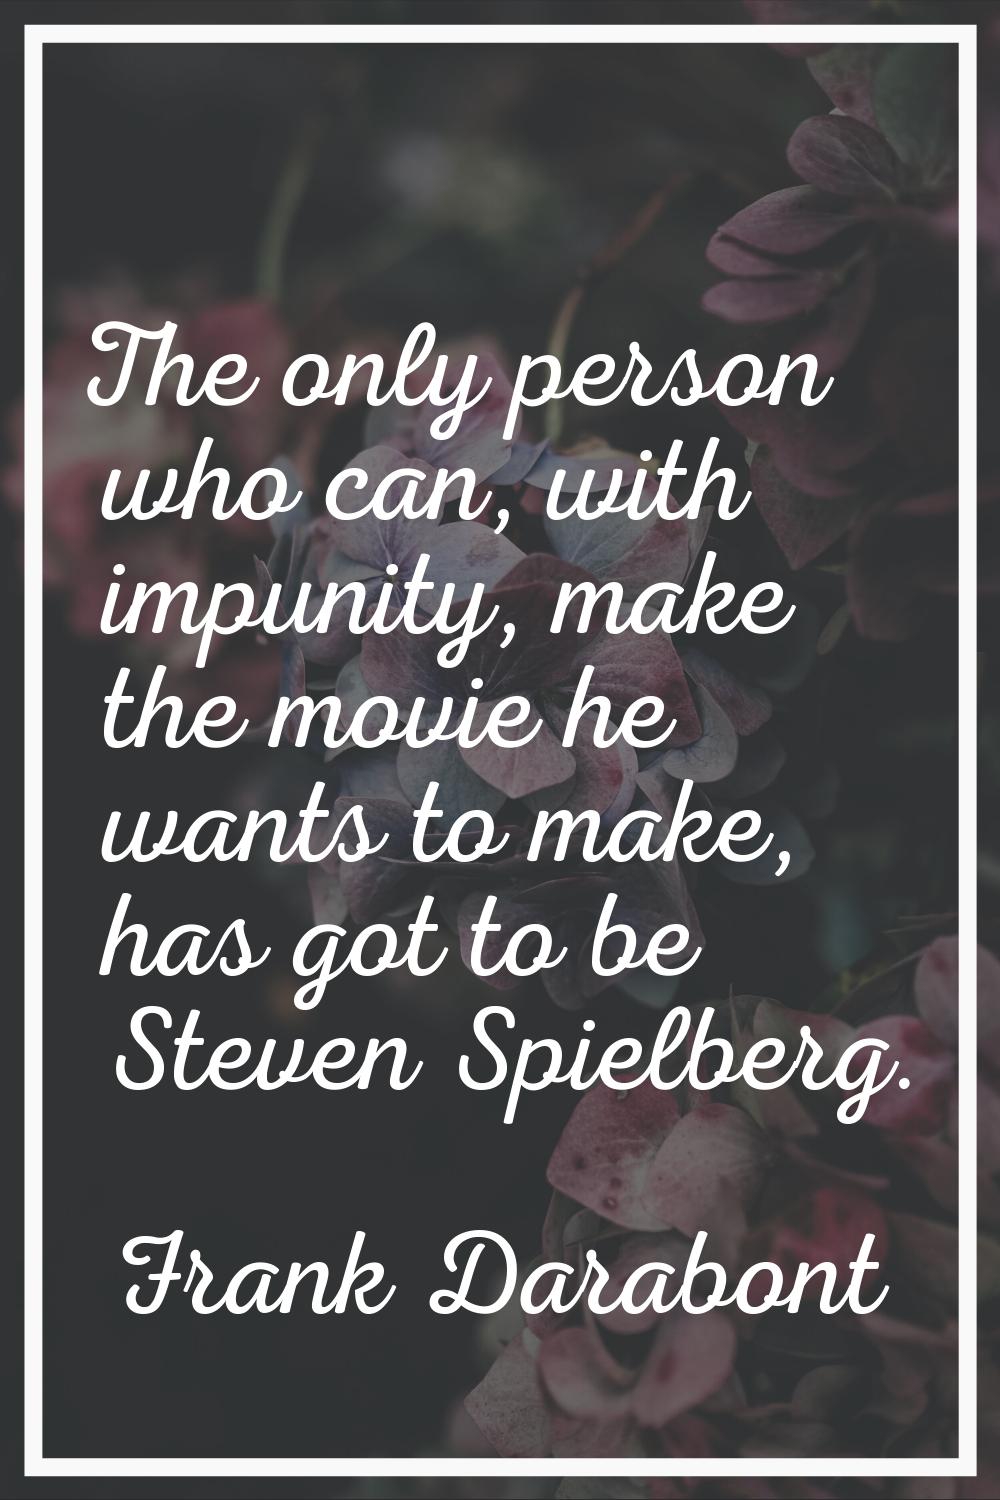 The only person who can, with impunity, make the movie he wants to make, has got to be Steven Spiel